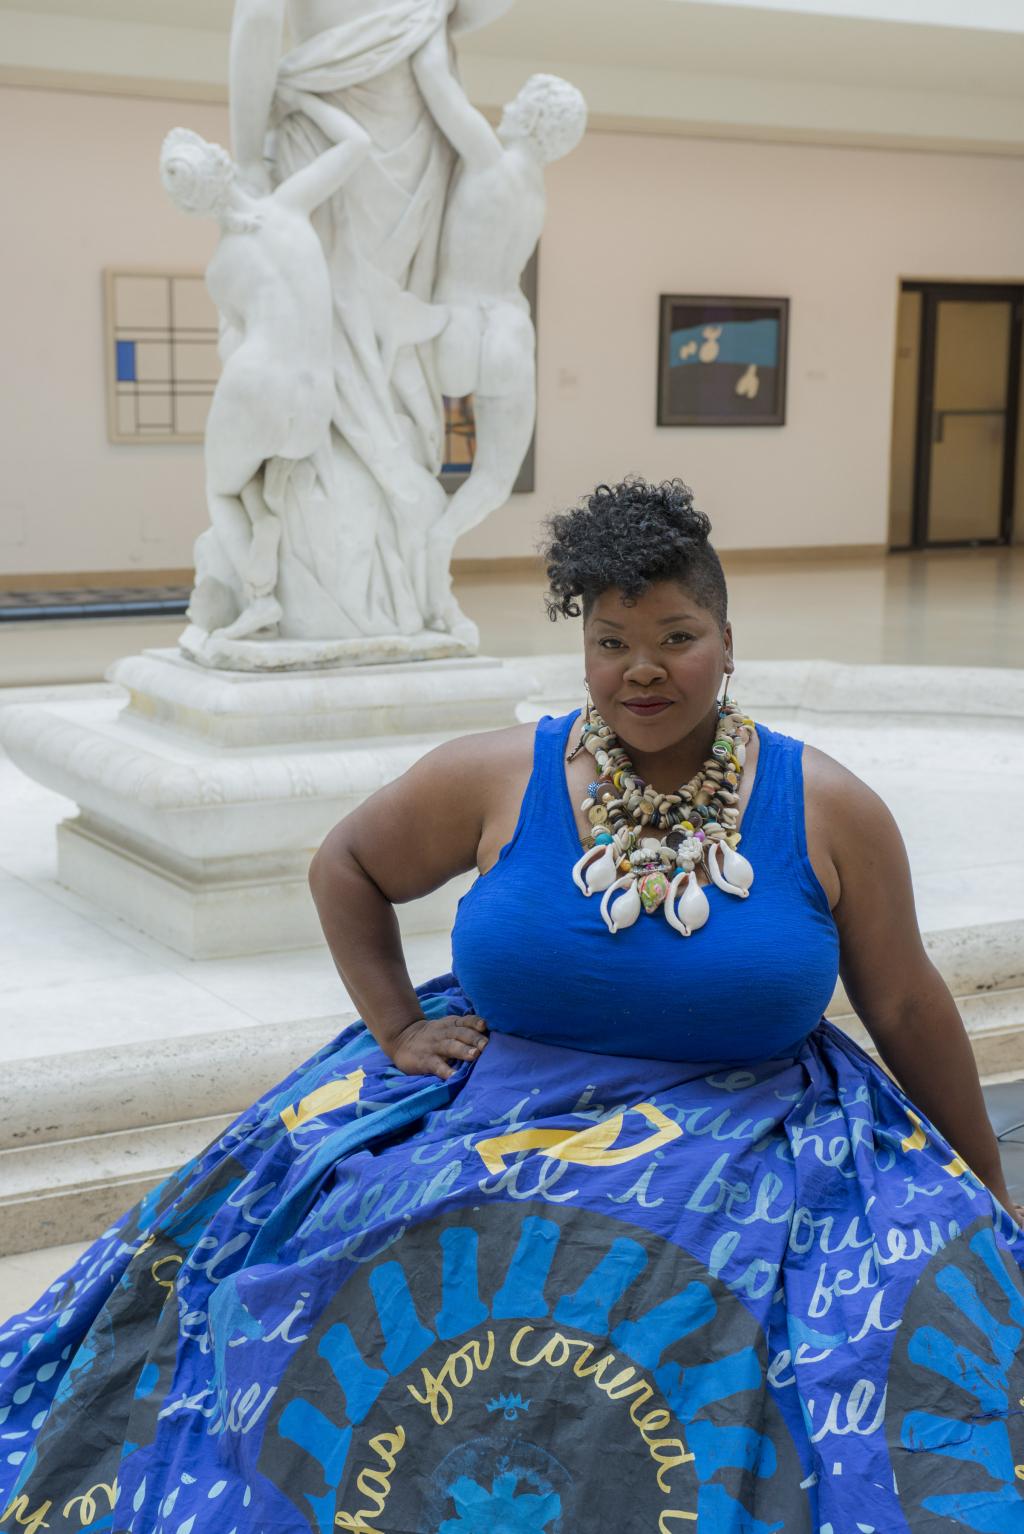 Vanessa German in a gorgeous blue tank dress with full skirt and gold necklace in Avery Court, Wadsworth Atheneum Museum of Art, Hartford, CT, 2016. Photo by Allen Phillips / Wadsworth Atheneum.